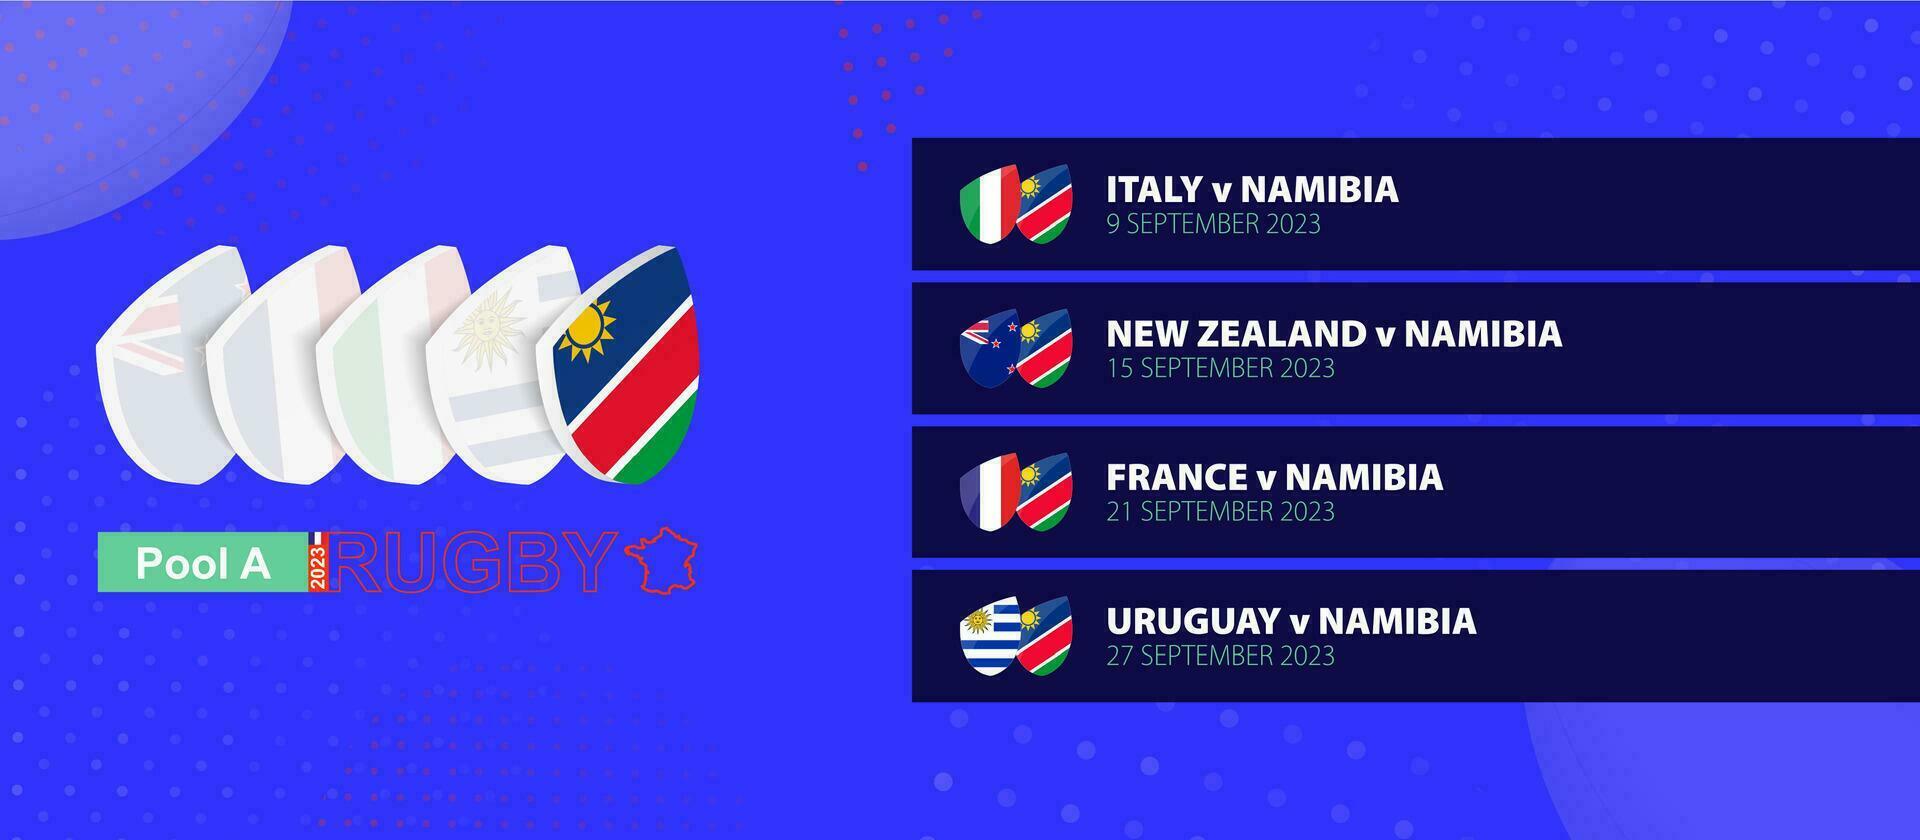 Namibia rugby national team schedule matches in group stage of international rugby competition. vector